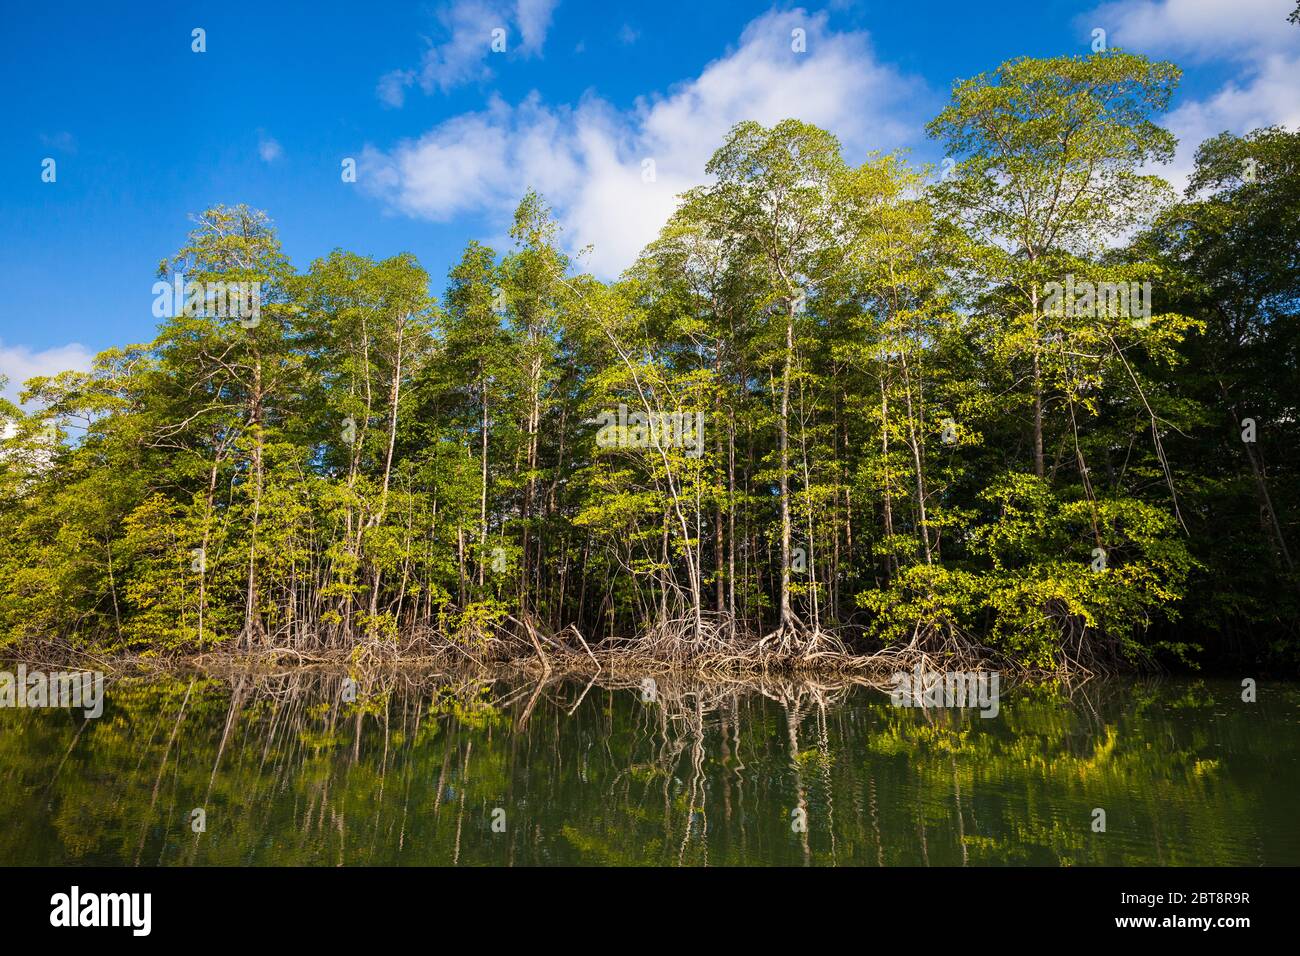 Panama landscape with mangrove forest at Coiba island national park, Pacific coast, Veraguas province, Republic of Panama. Stock Photo